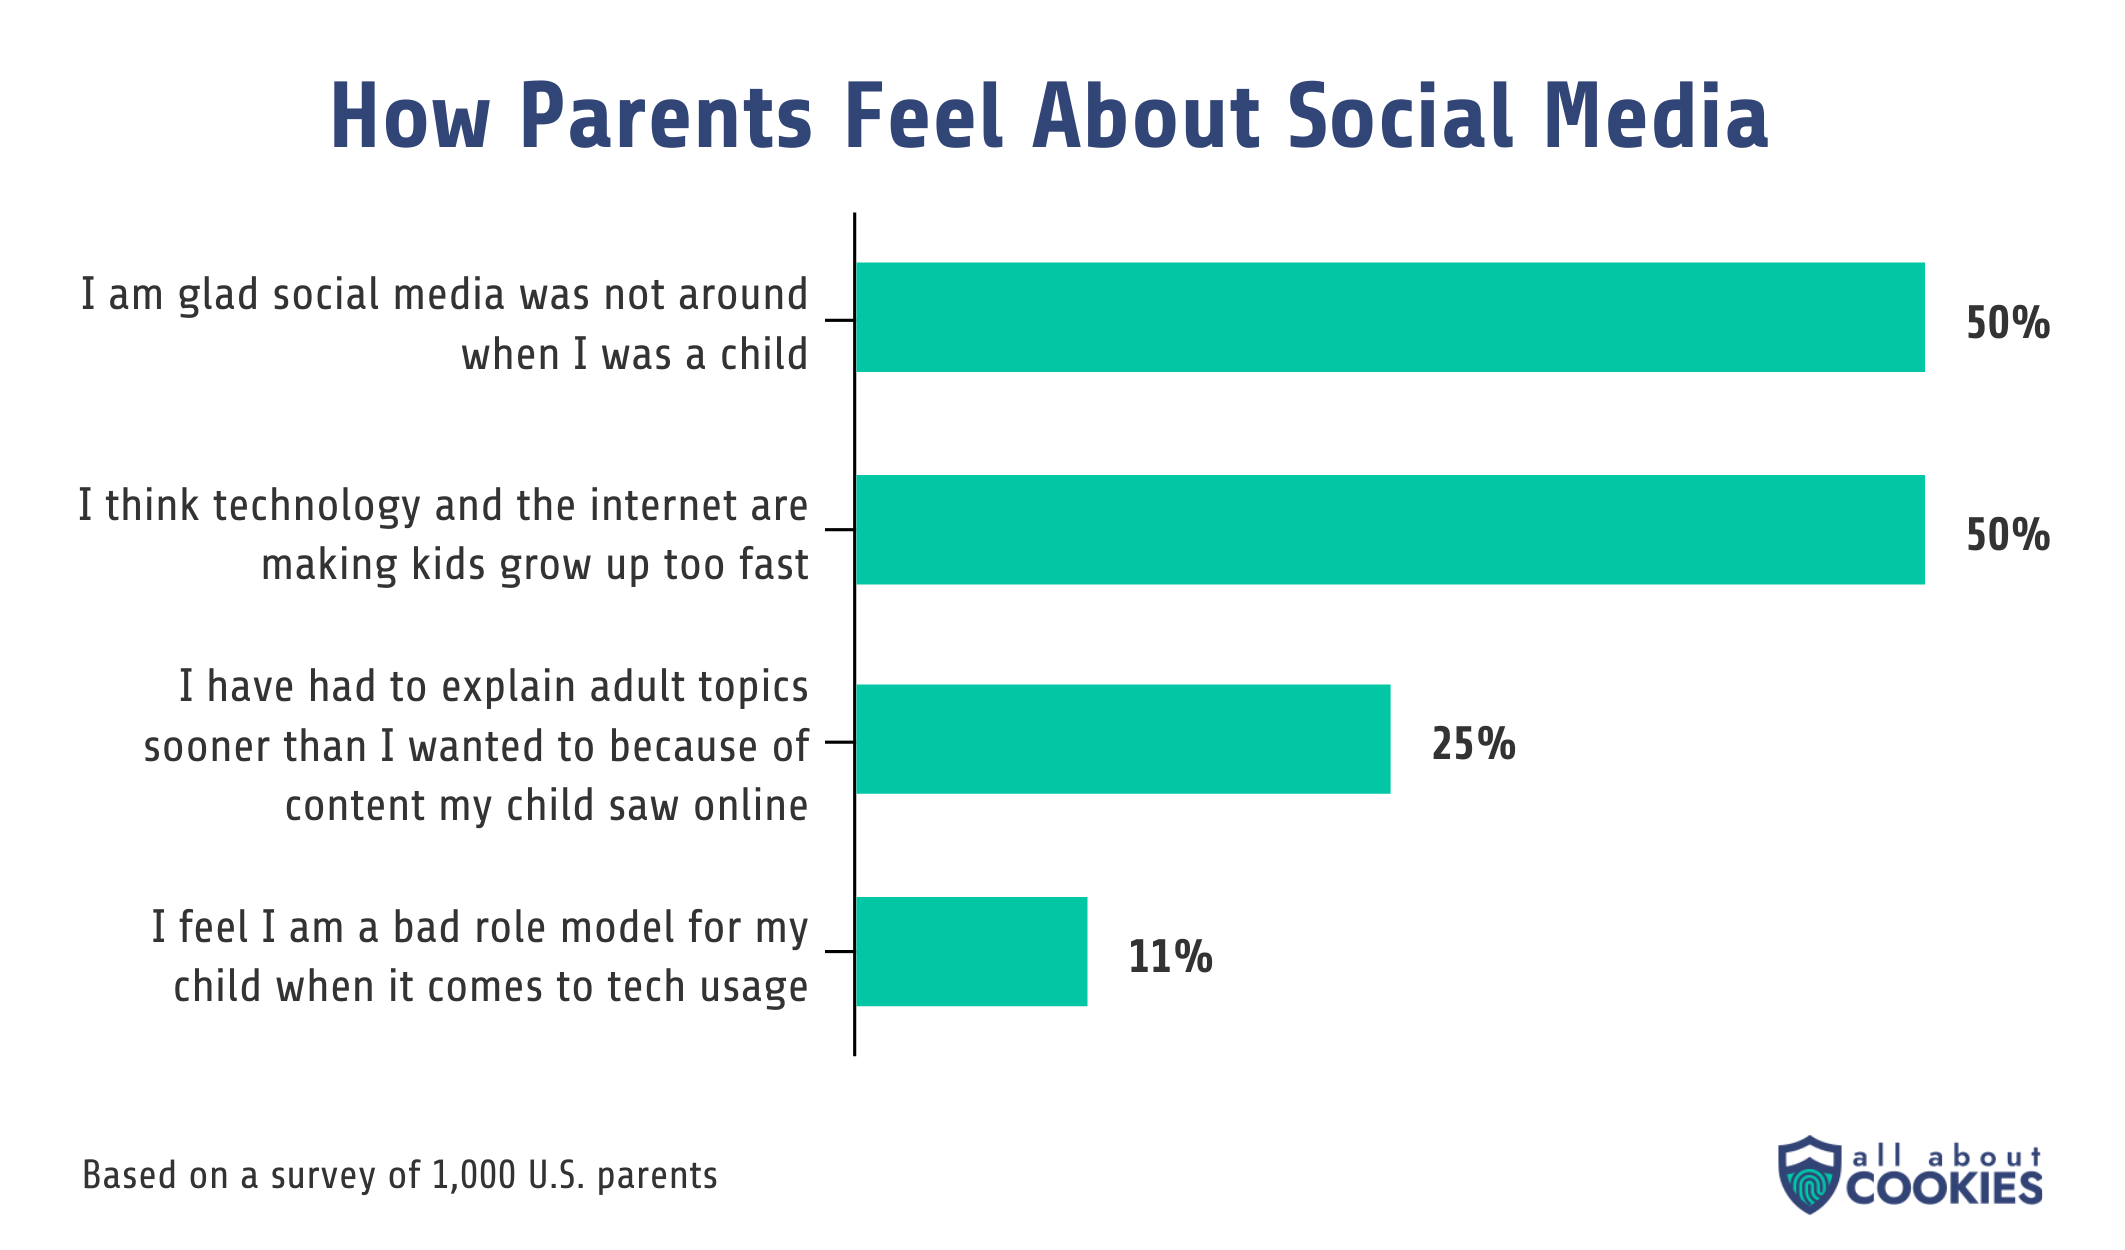 A bar chart showing how parents feel about social media. 50% of parents were glad social media wasn't around when they were kids, and 50% also think technology and the internet make kids grow up too fast.